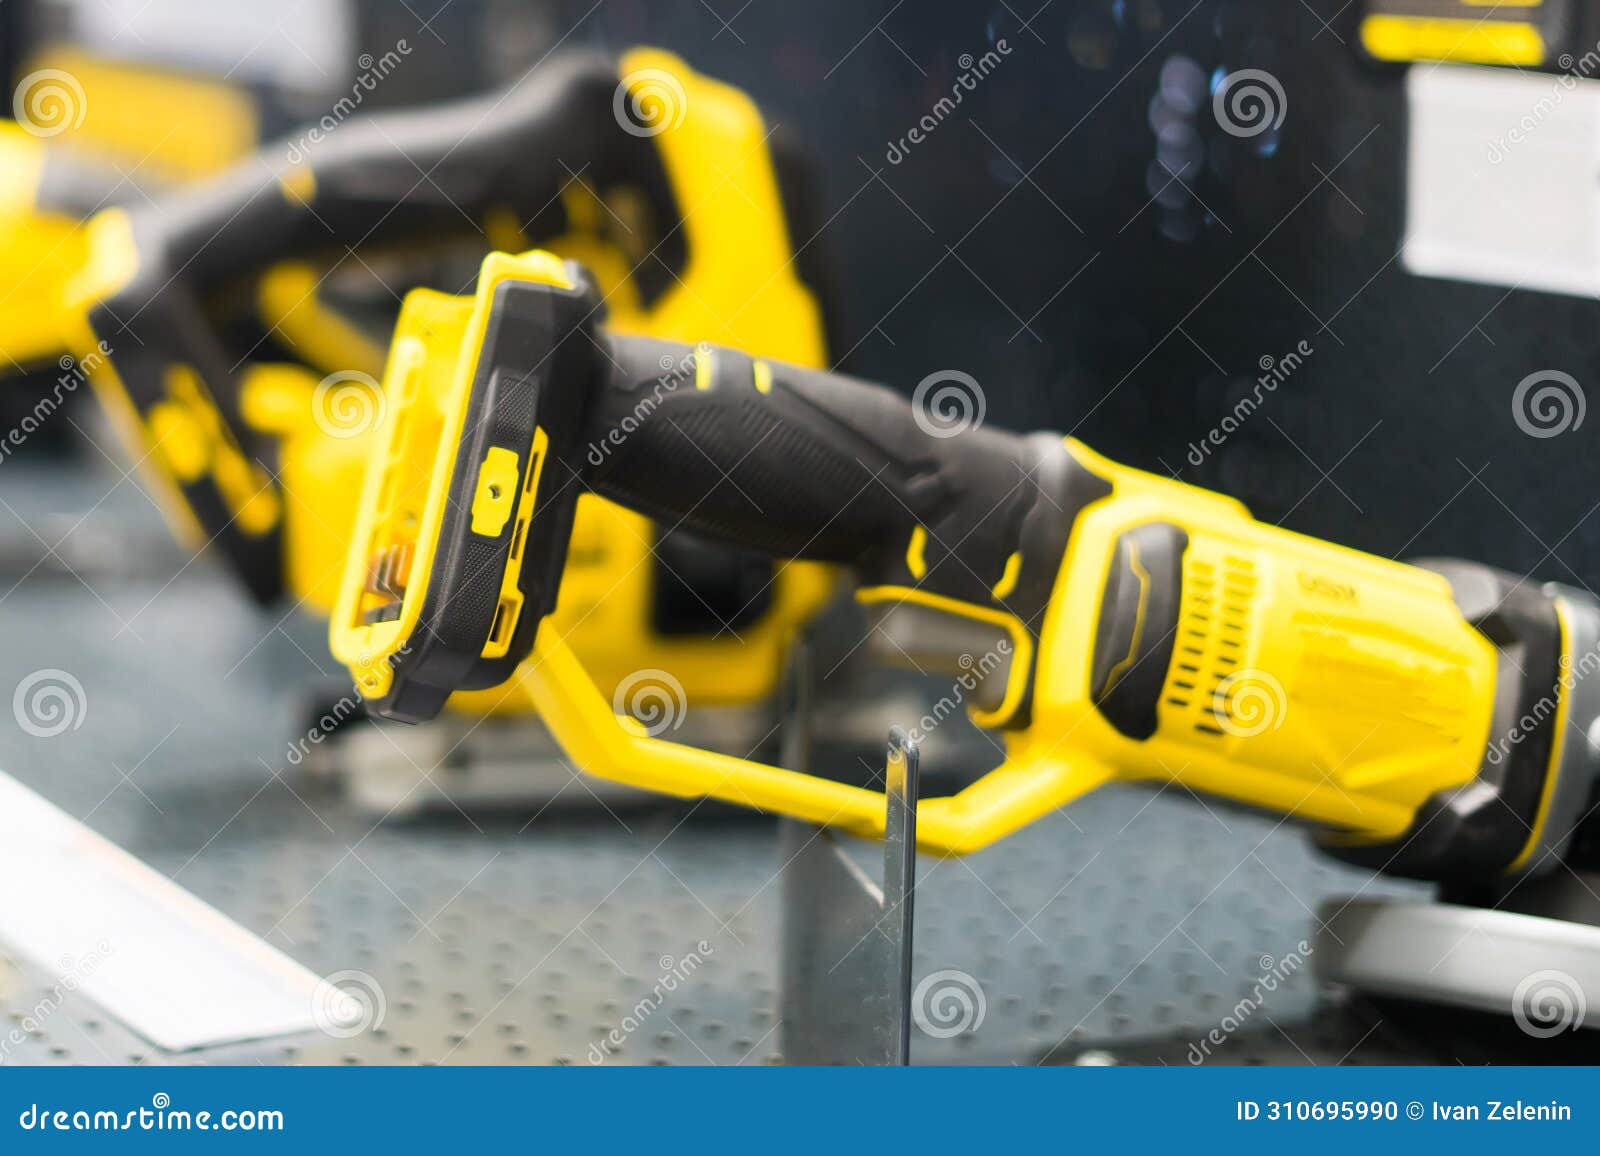 power tools, drills and hammers of various manufacturers are sold in a hardware store.